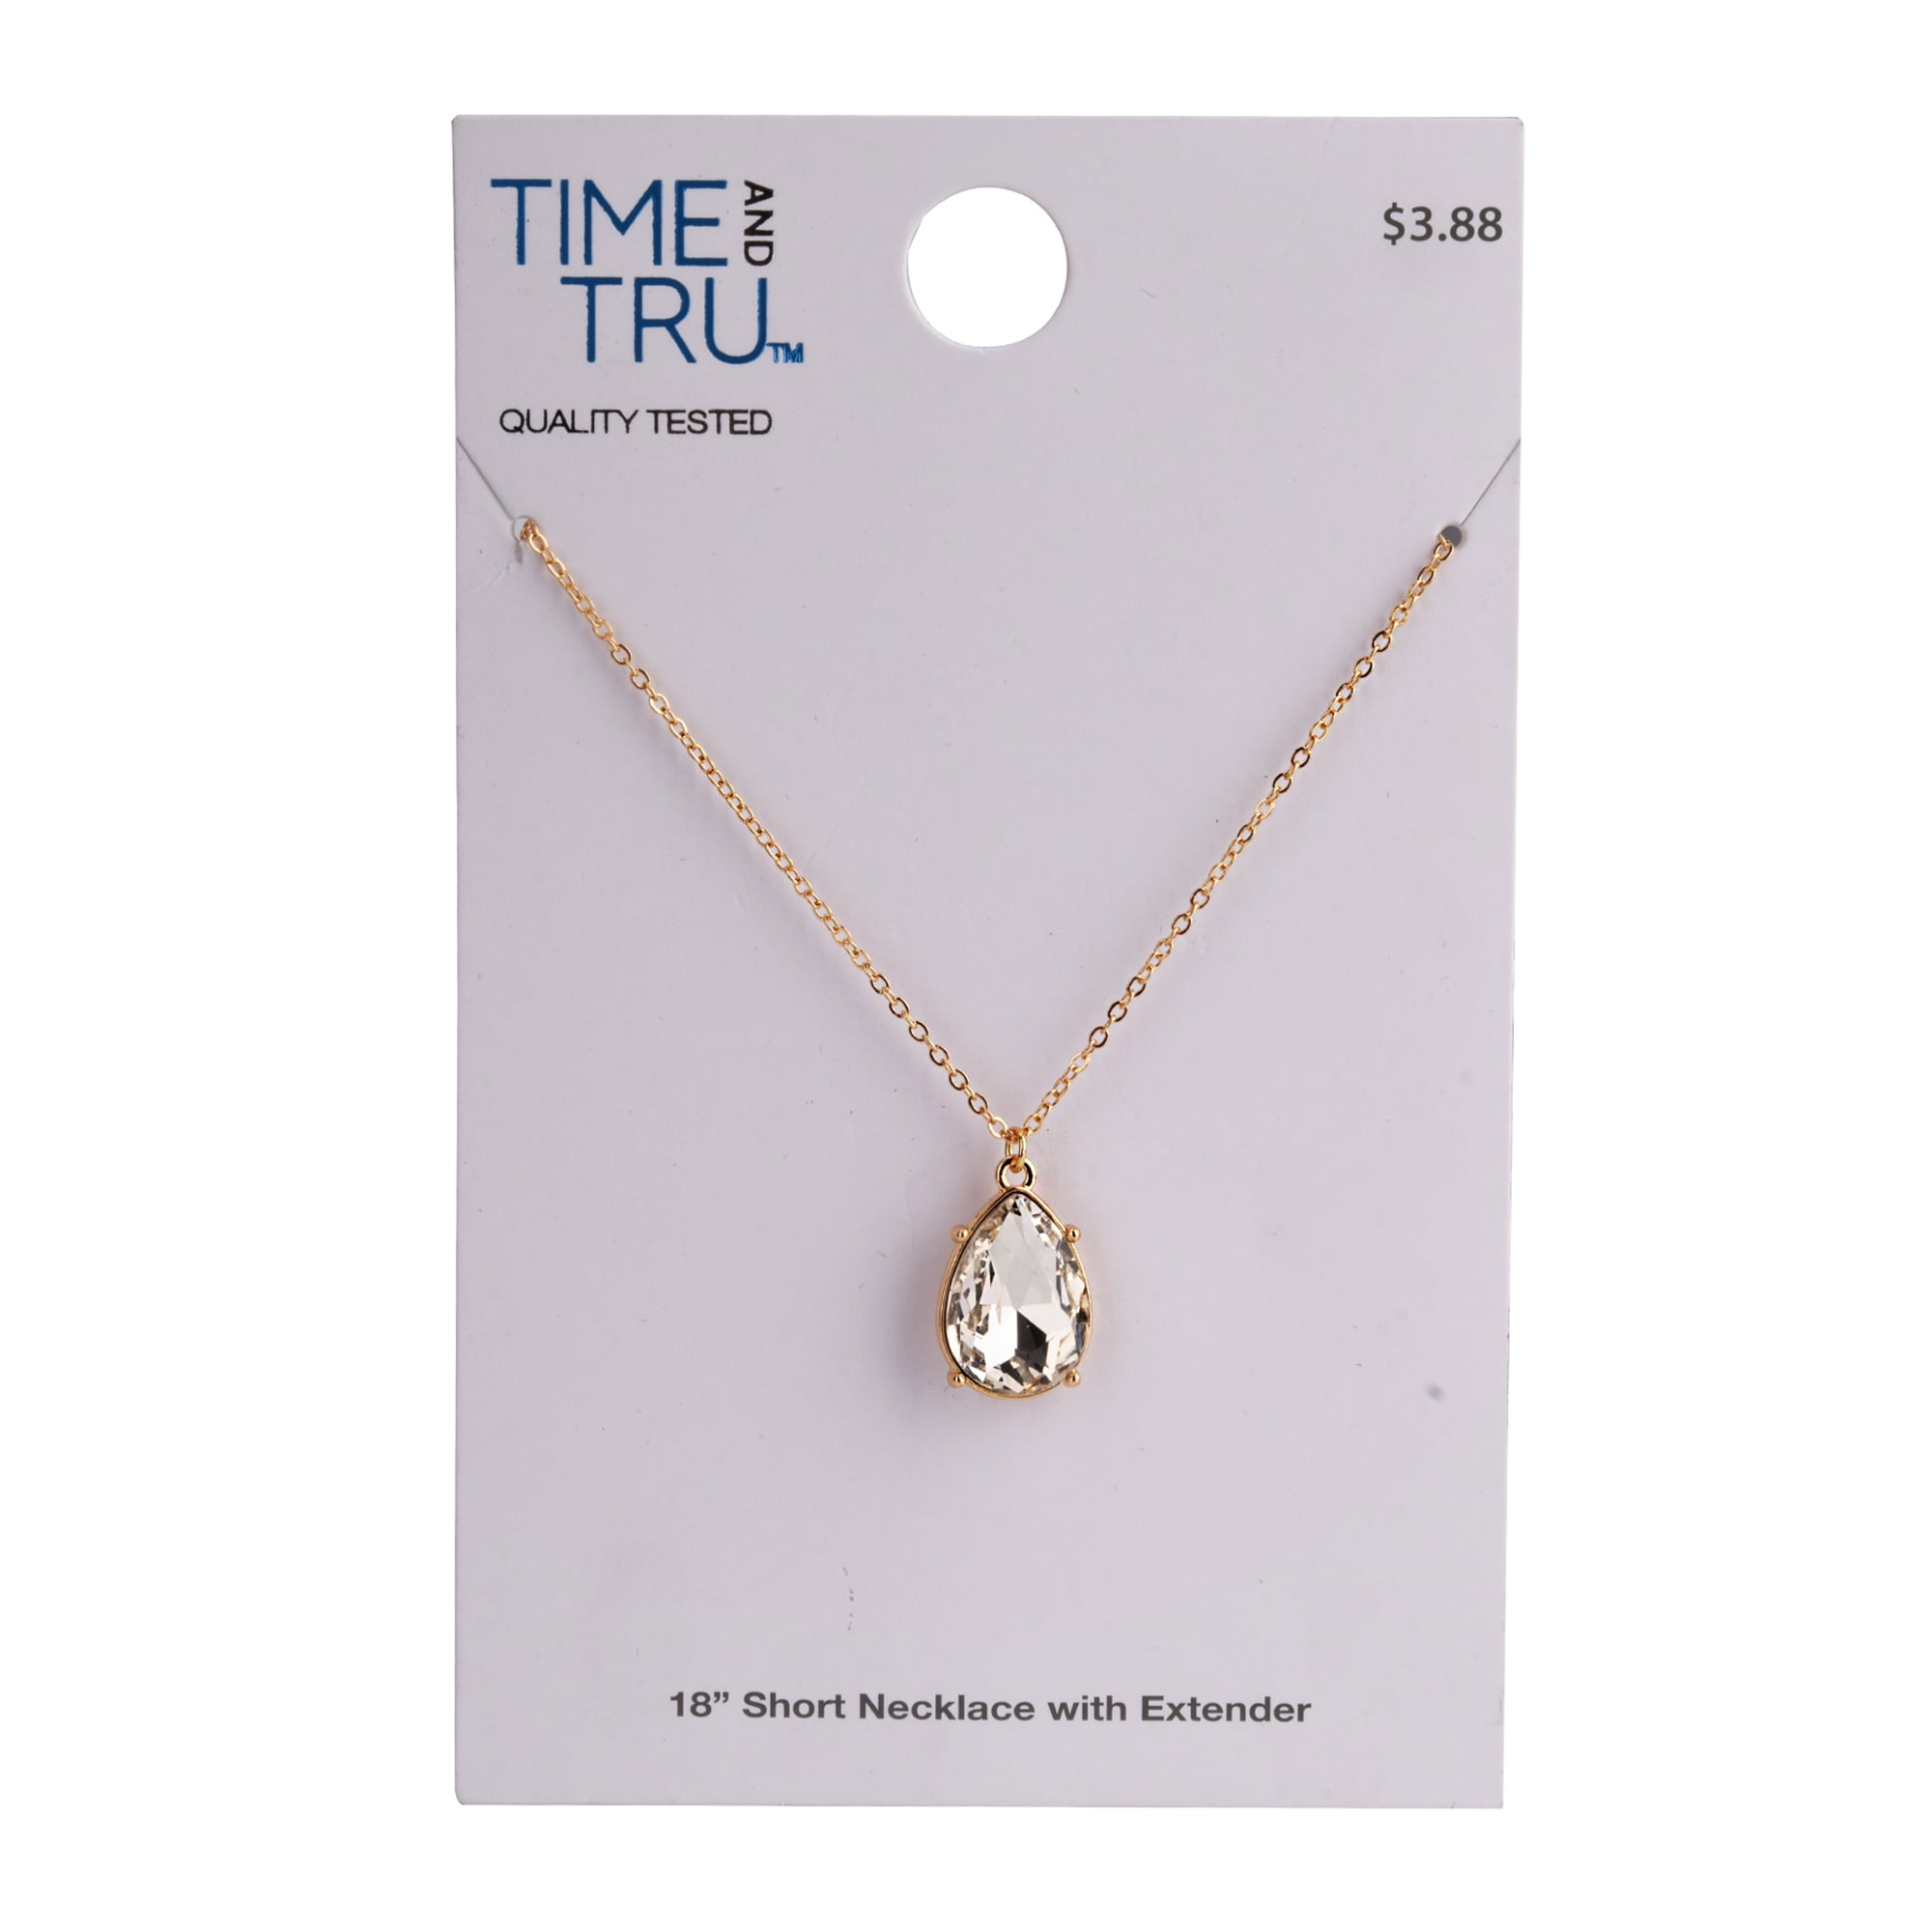 "Time and Tru" Gold Cry Pearshape Pendant Necklace